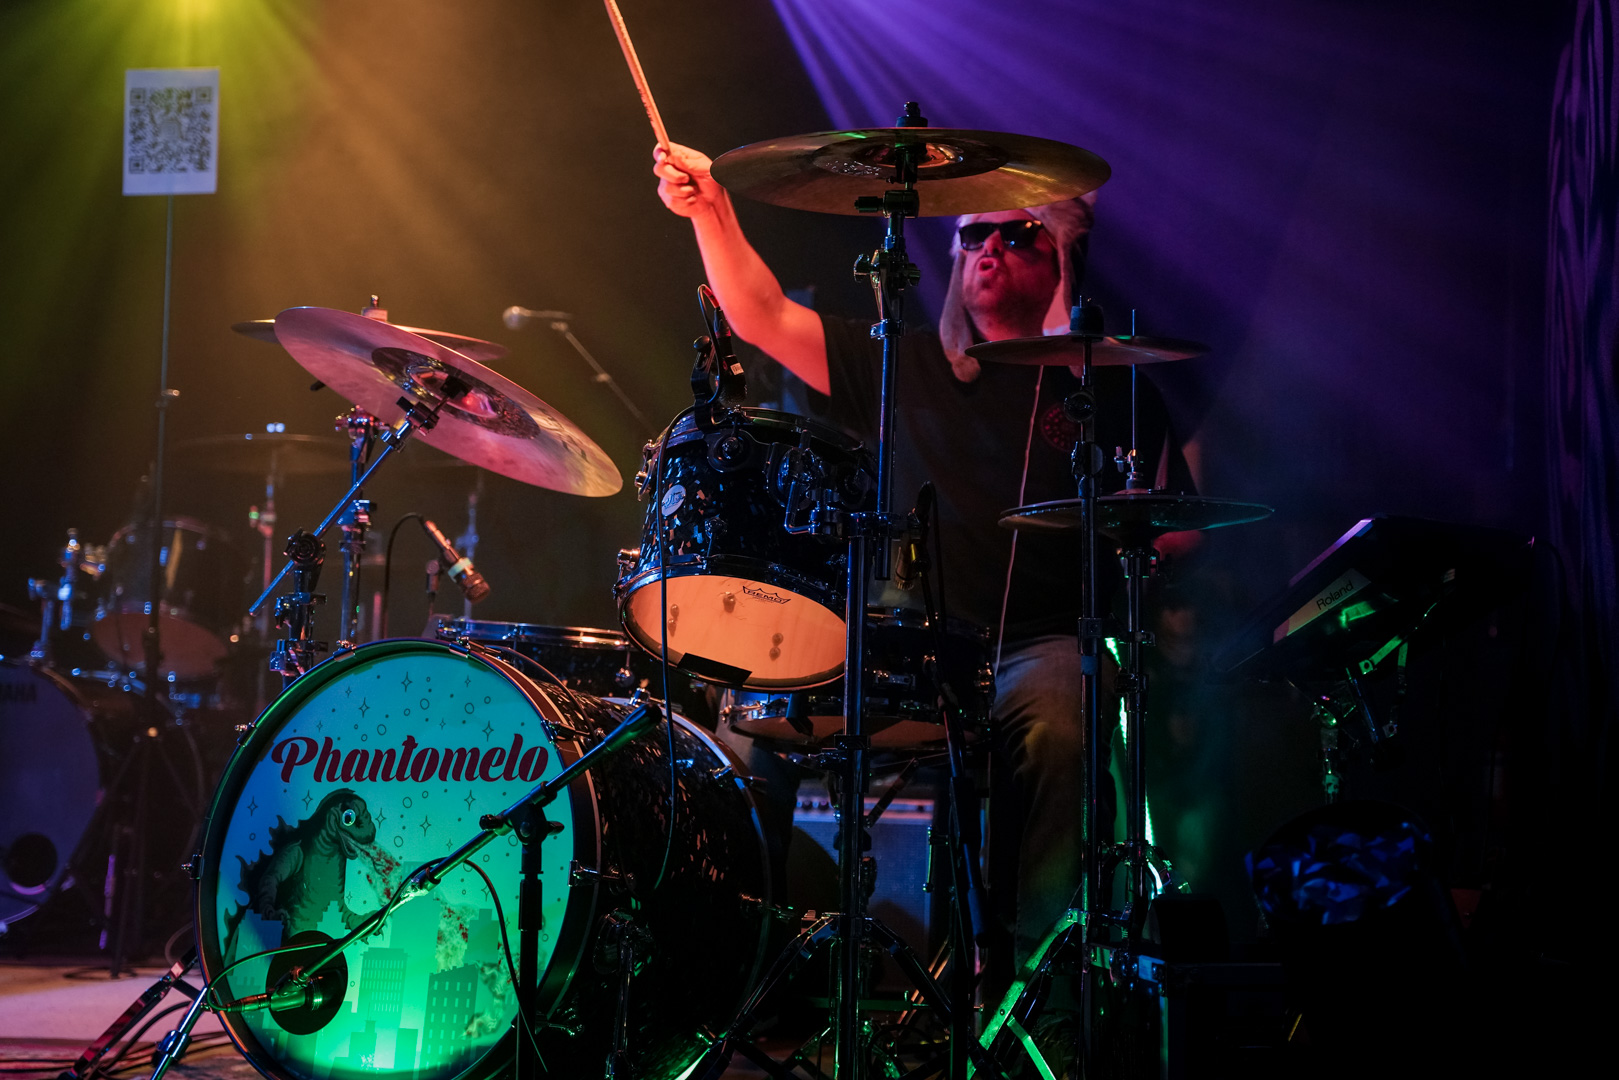 A drummer behind his drums playing with a drumstick in the hair in his right hand